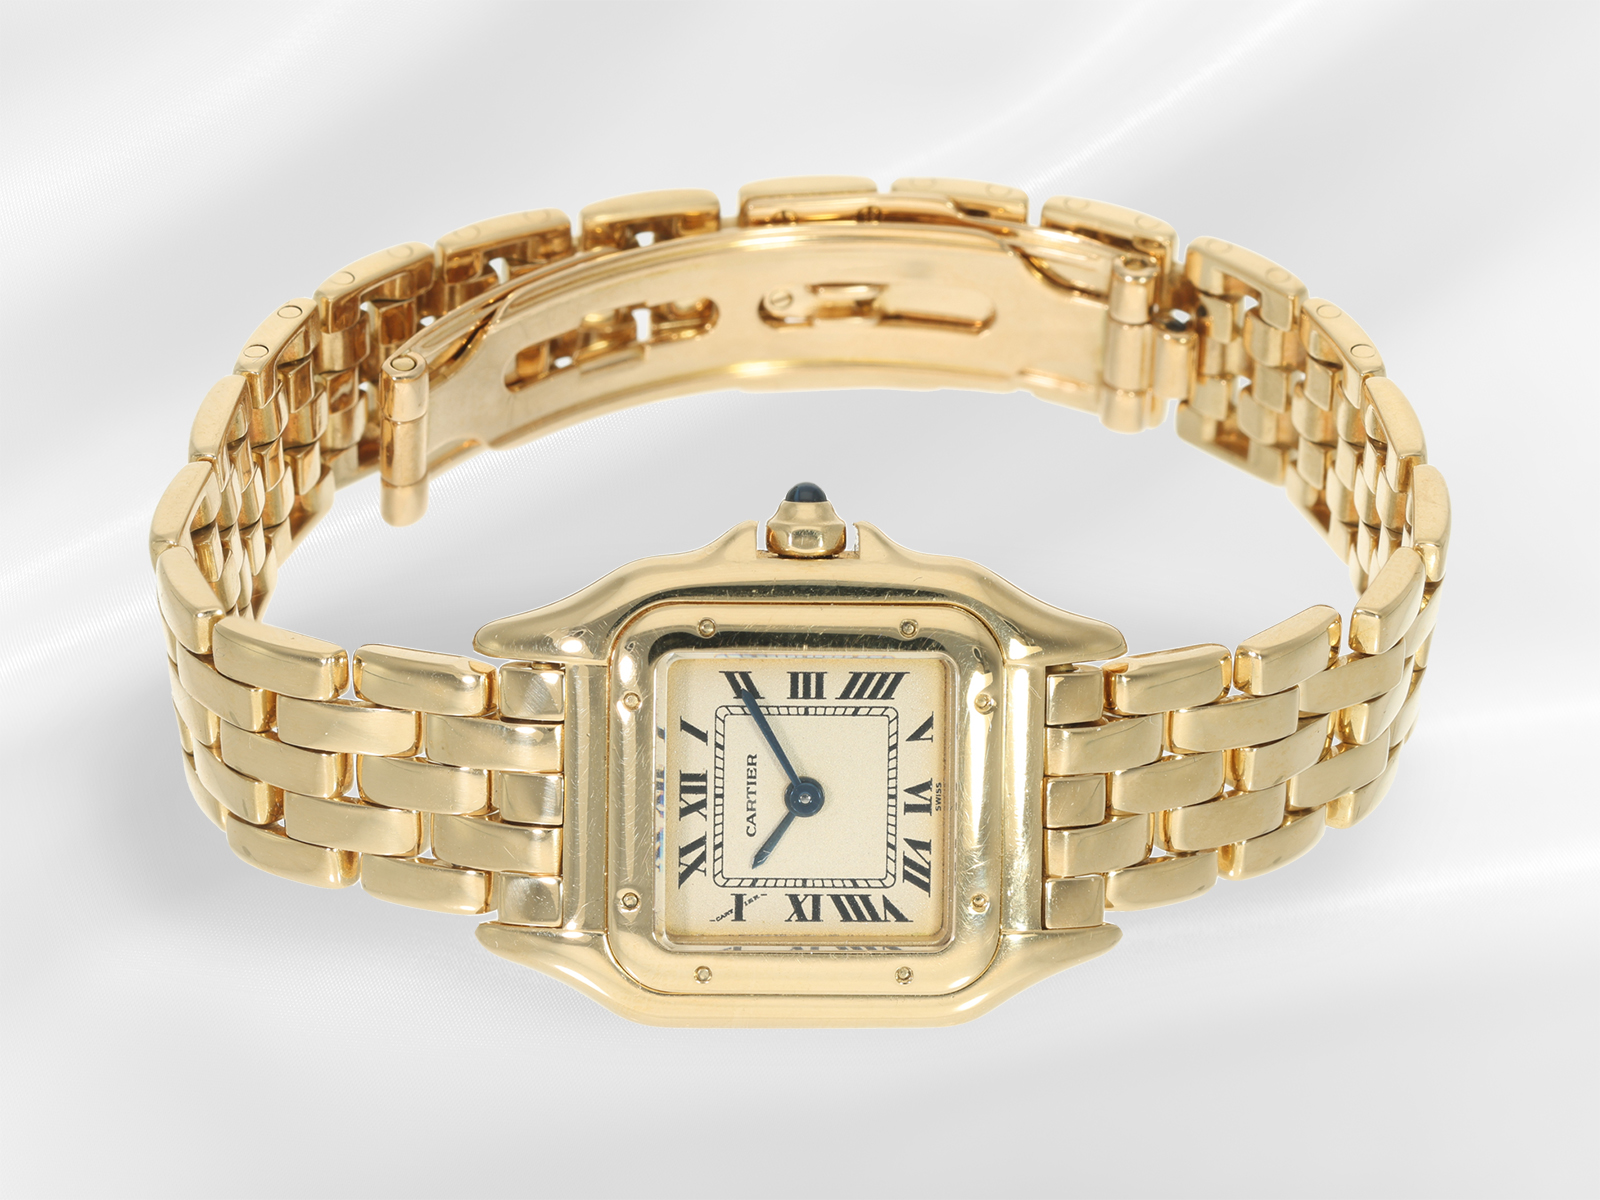 Wristwatch: luxurious Cartier ladies' watch in 18K gold "Panthère 22 x 28" - Image 2 of 4